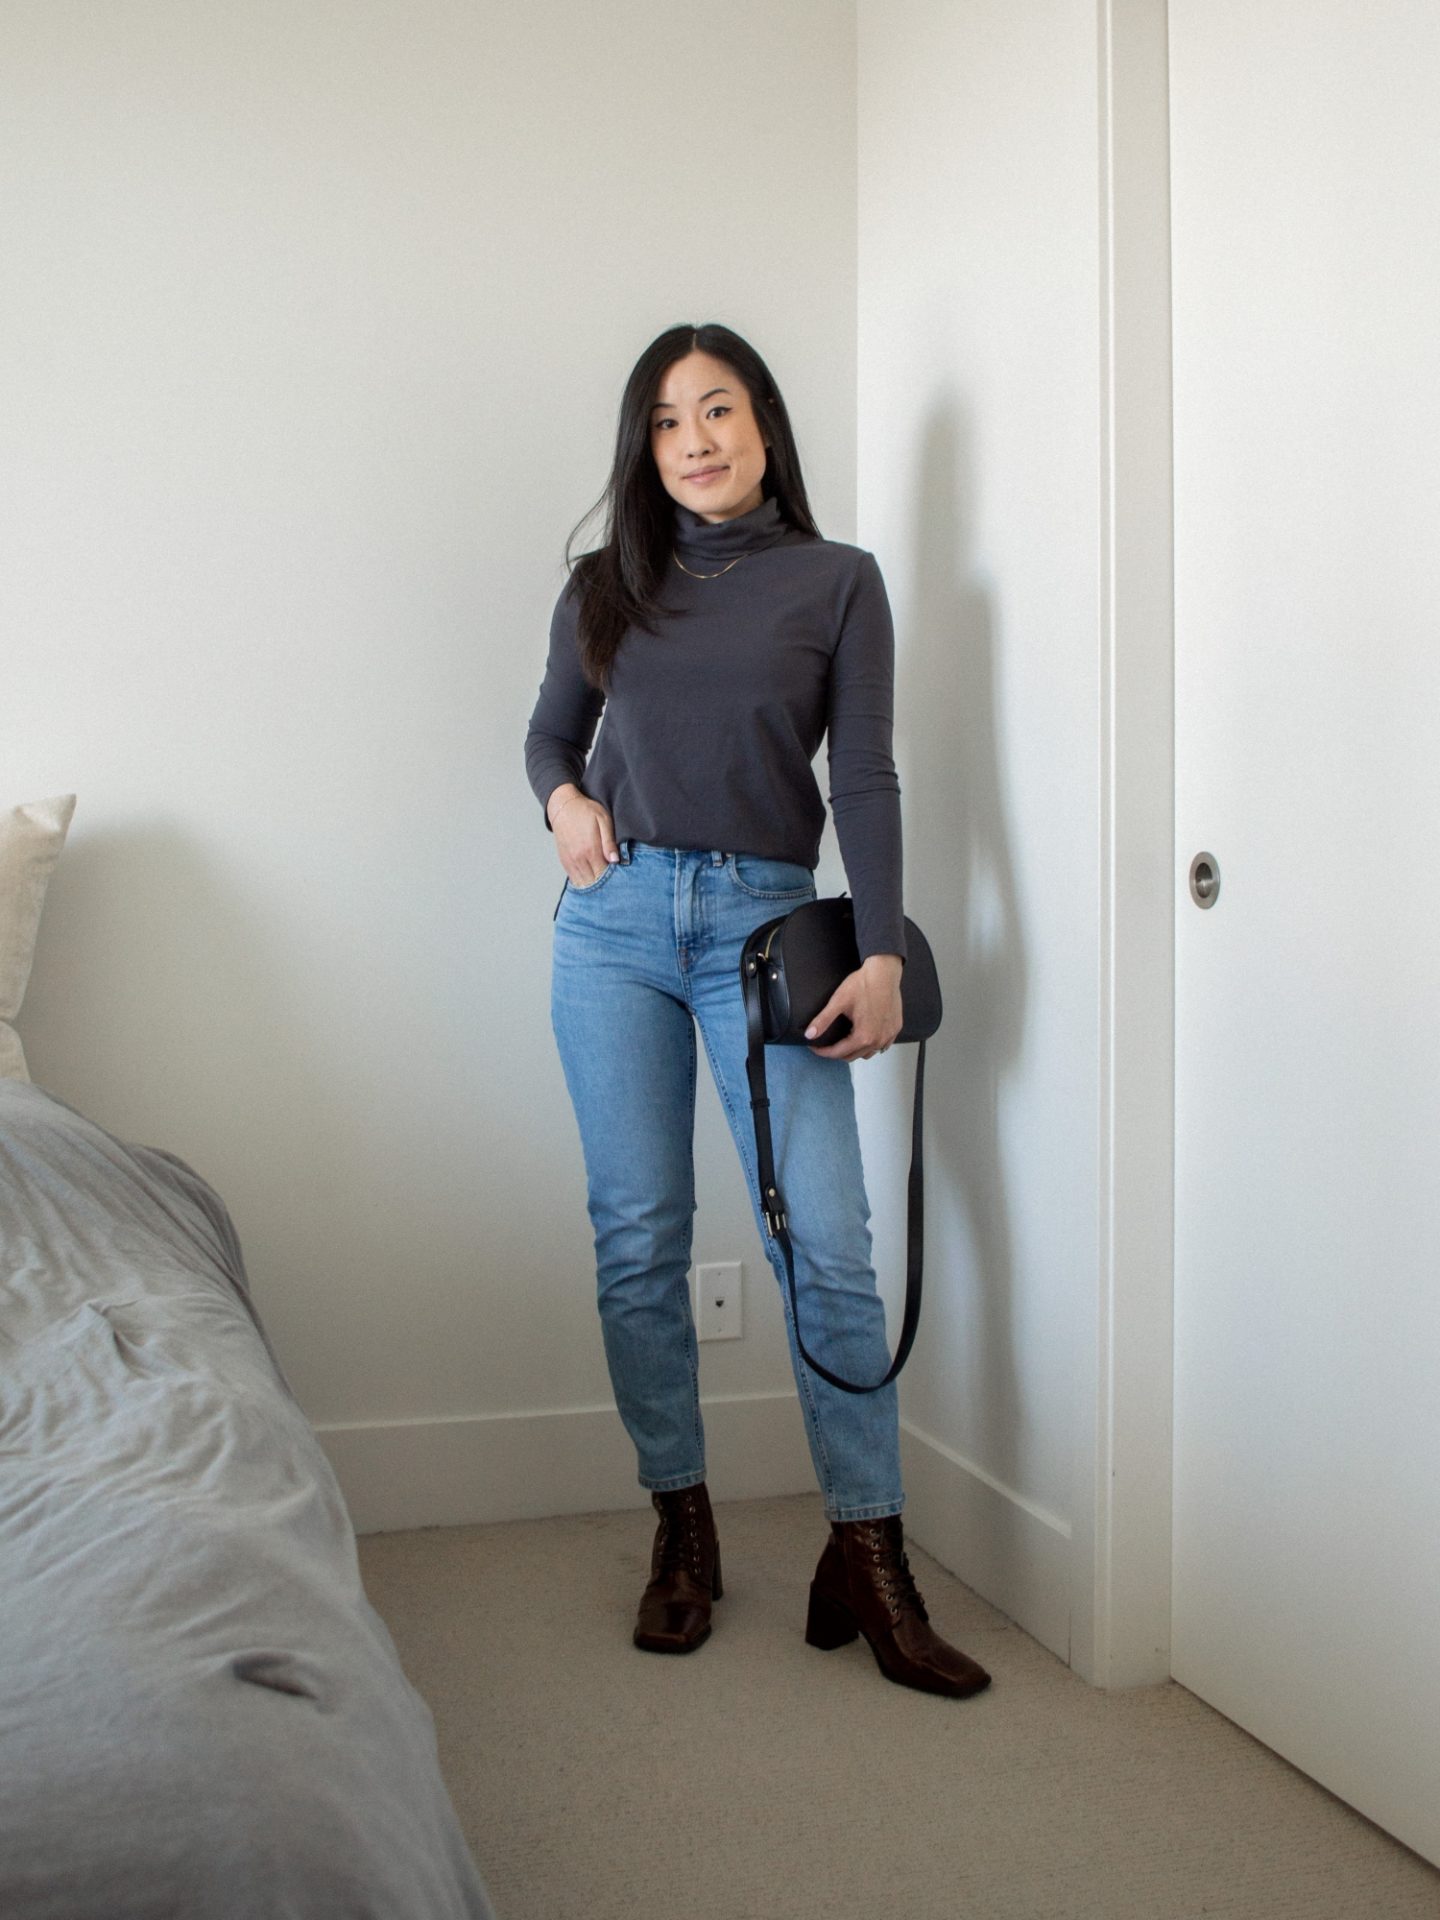 How to style a turtleneck and elevate your style with these easy outfit  ideas